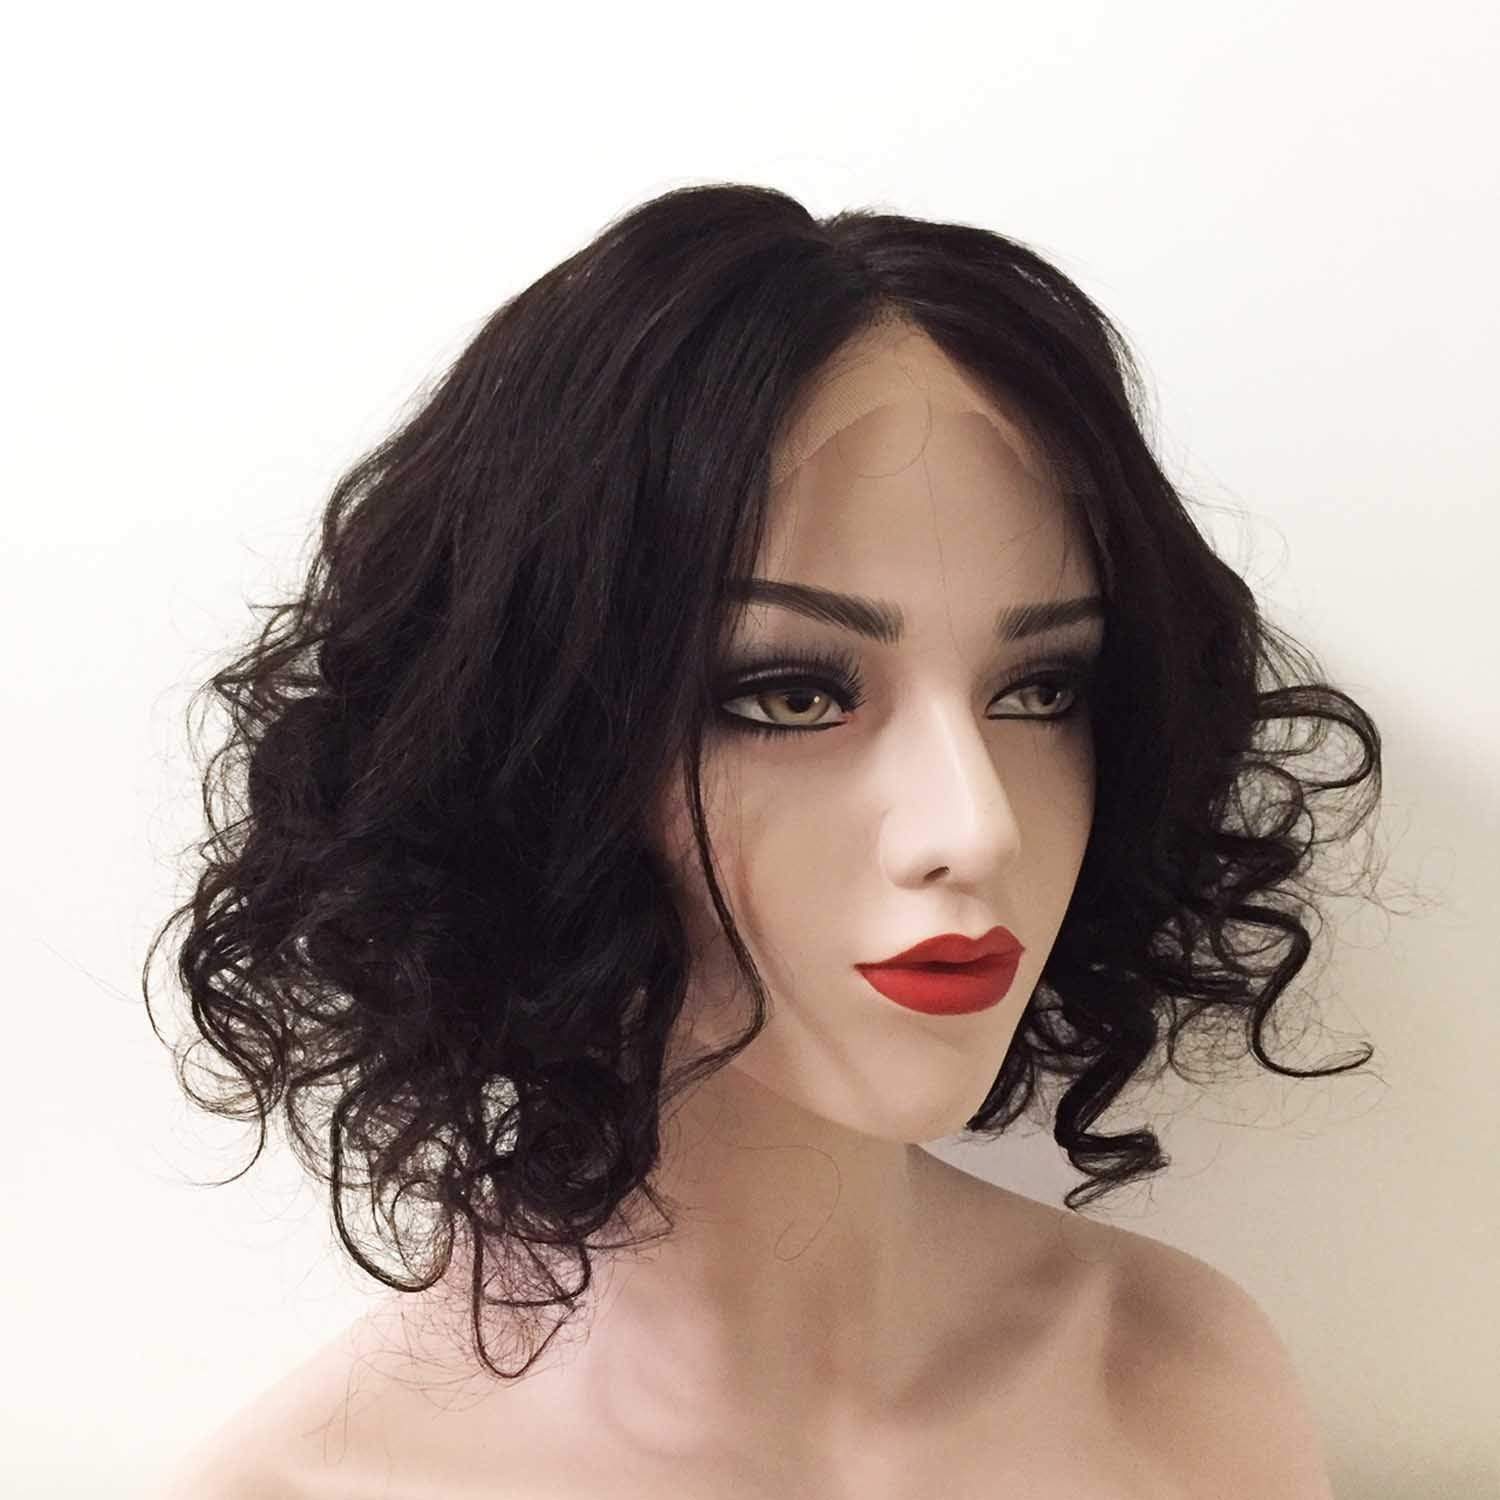 nevermindyrhead Women Black Human Hair Lace Front Short Curly Middle Part Wig